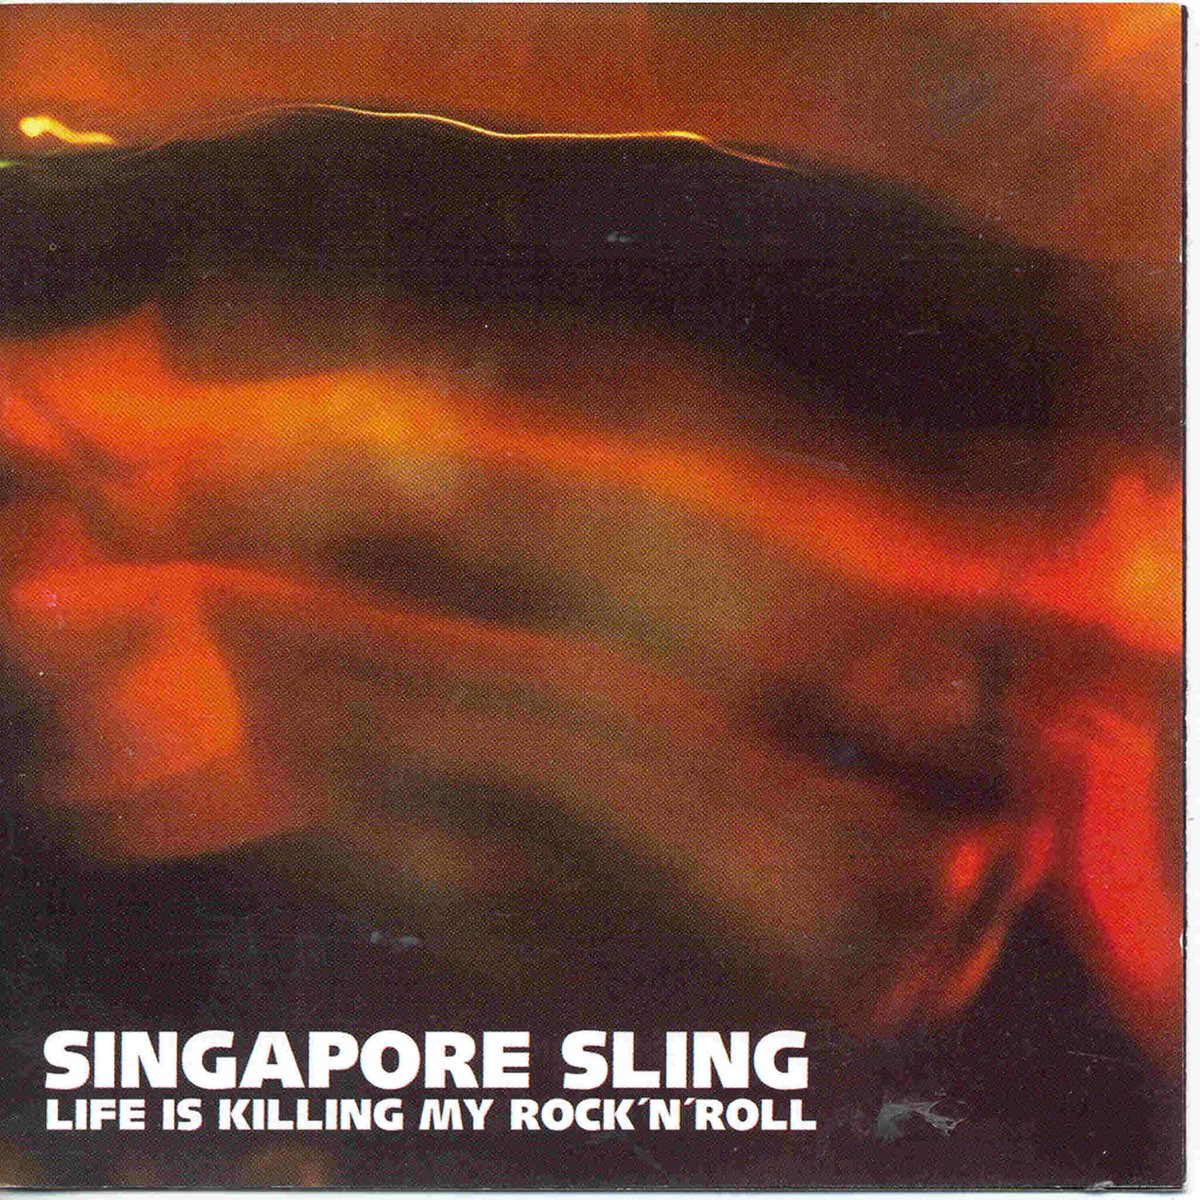 My life is to kill. Lee Rock & Kill sick. The Curse of Singapore Sling. My Life is Sling.